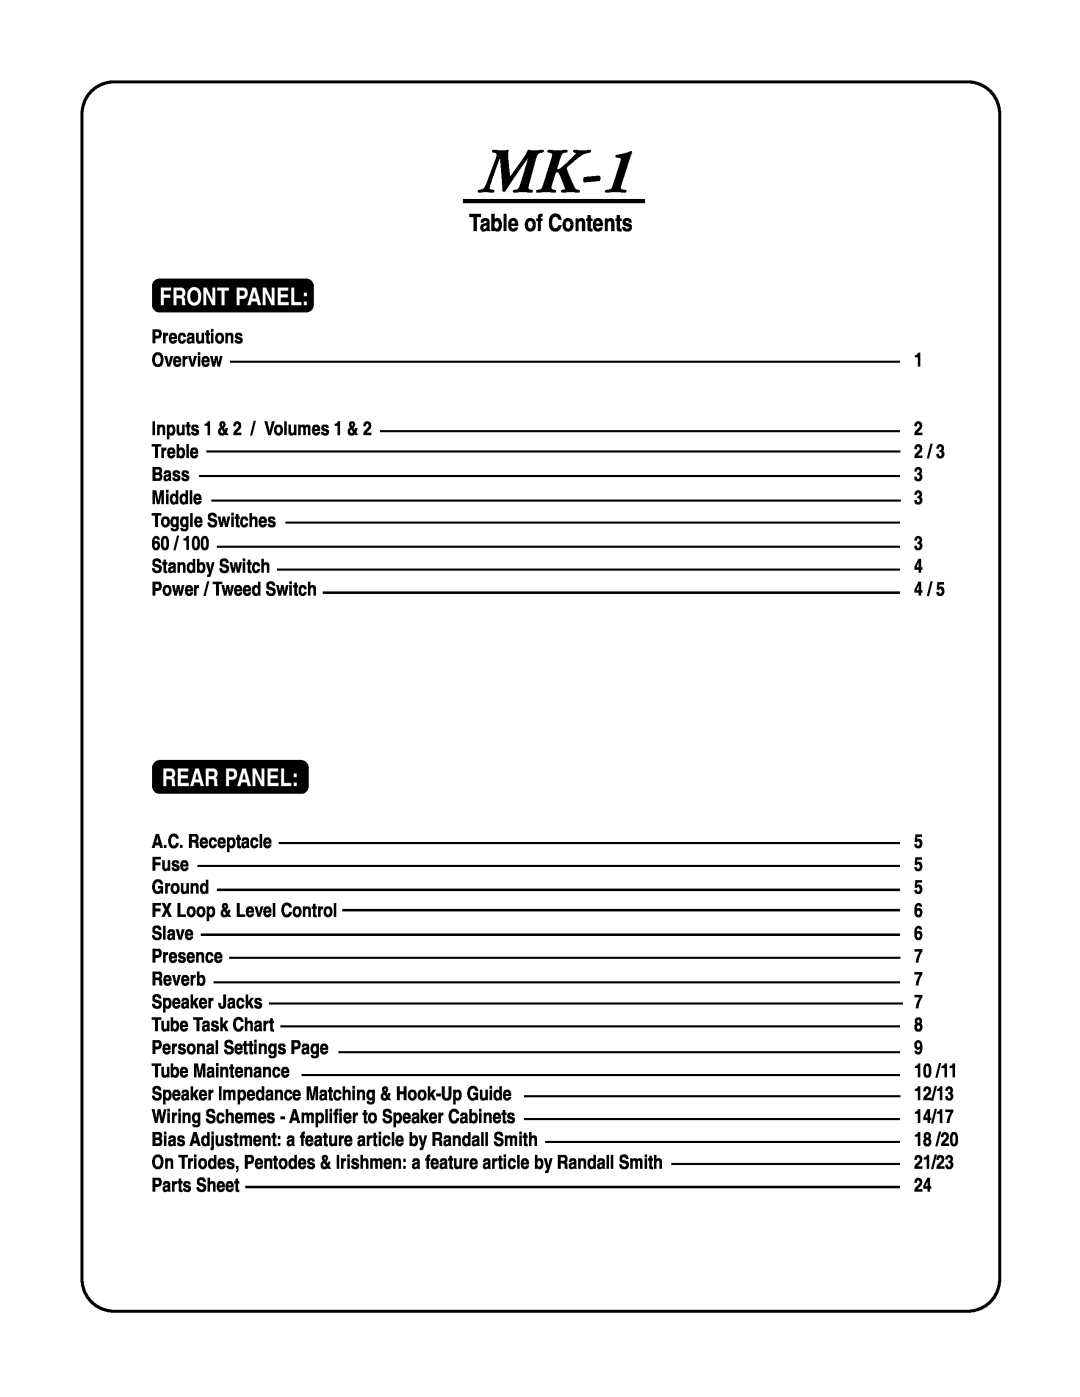 Mesa/Boogie MARK 1 owner manual MK-1, Table of Contents, Front Panel, Rear Panel, Precautions, Bass 